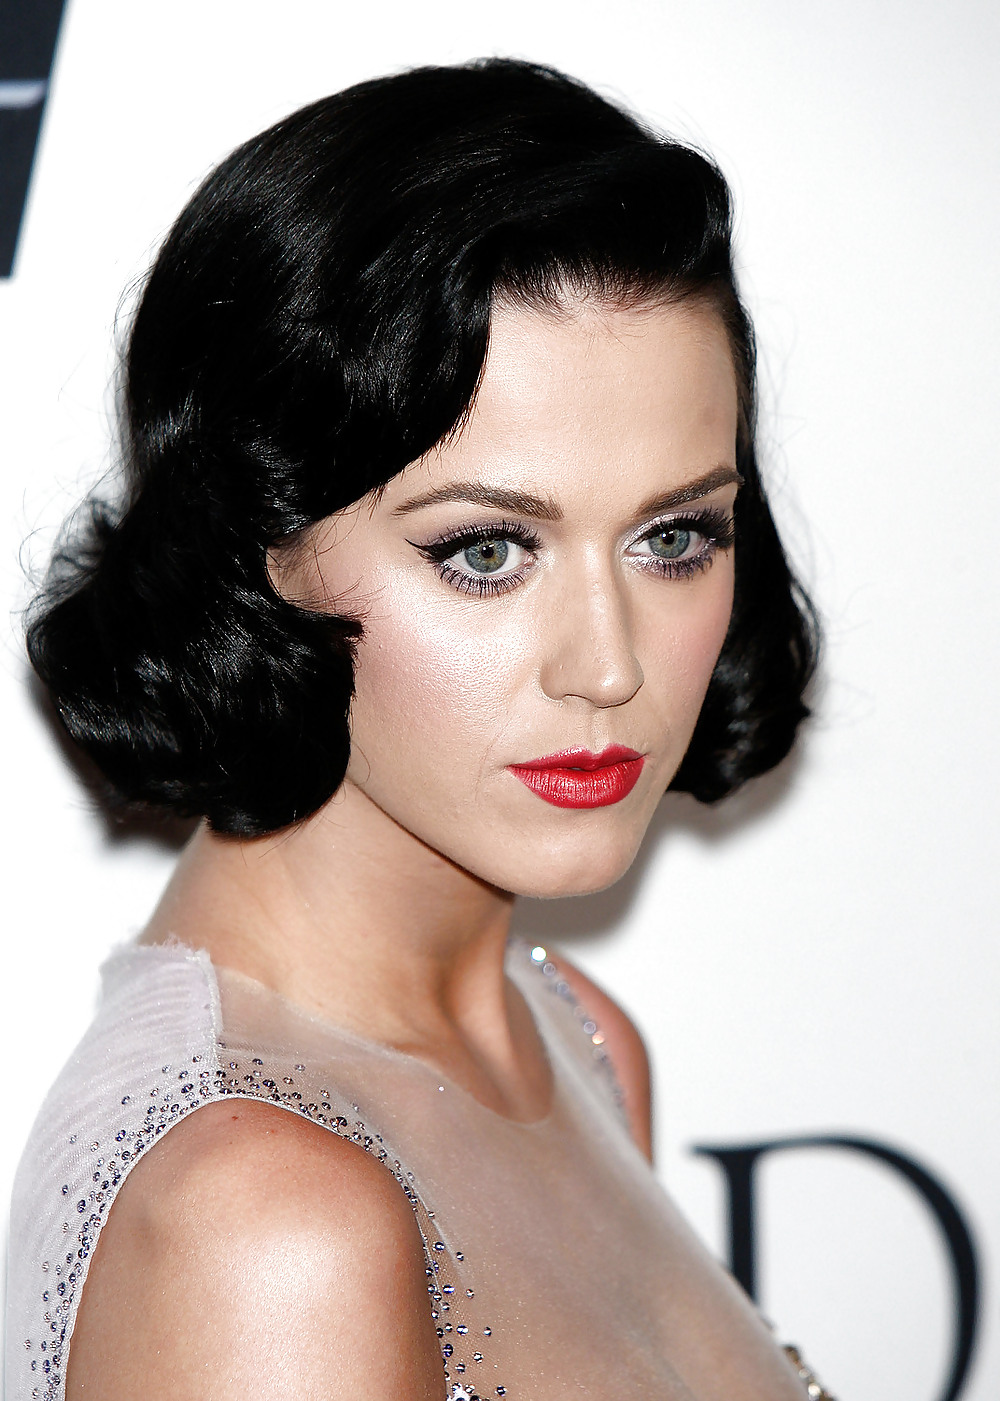 Katy Perry Dresses Up Real Good #37249604